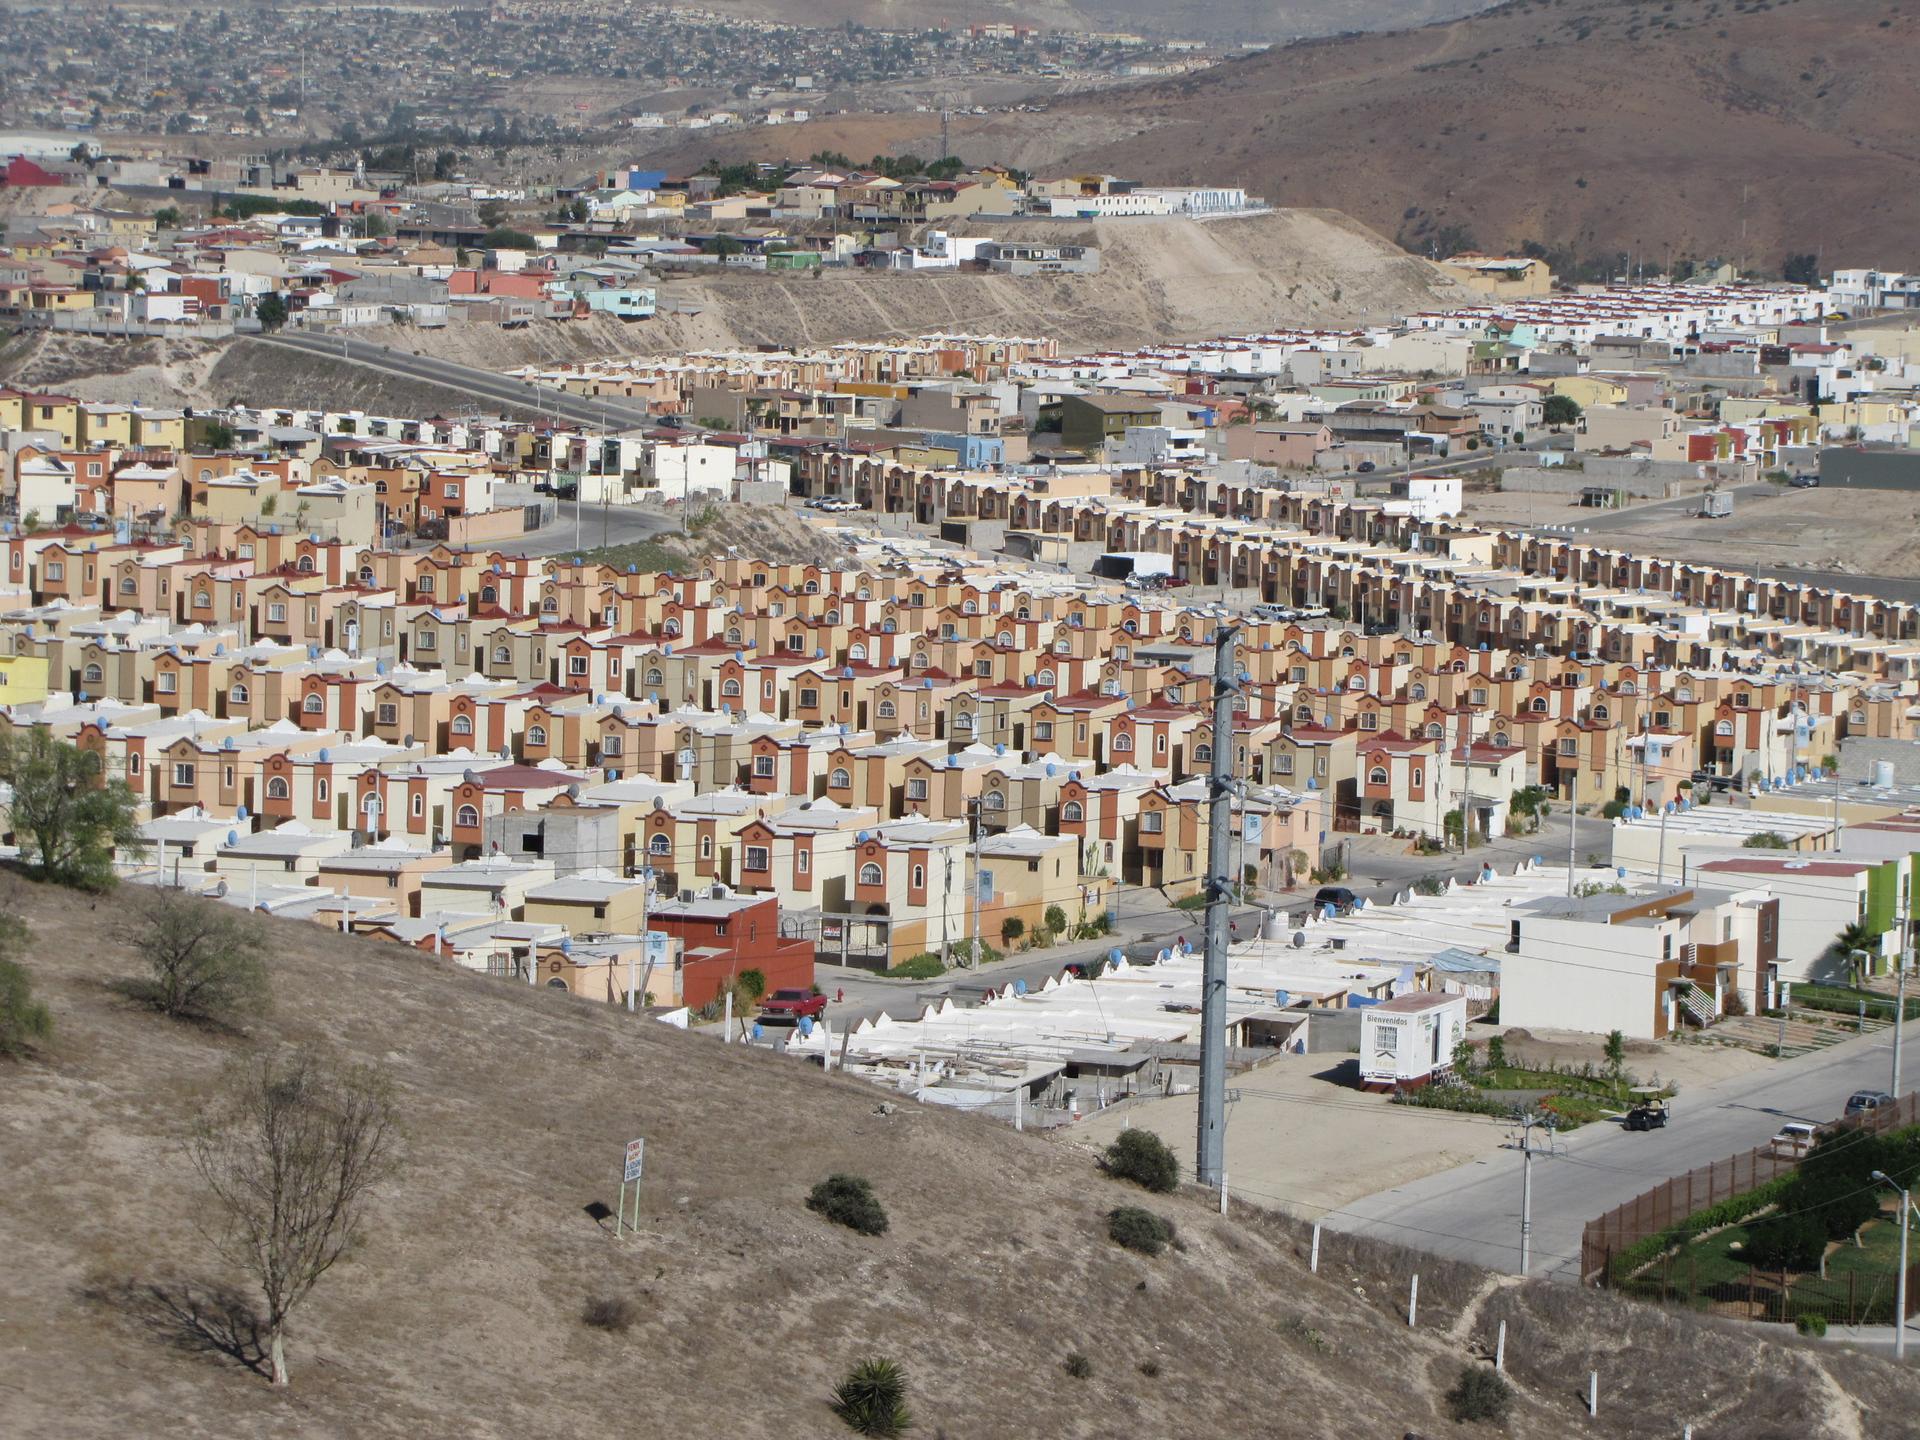 Planned housing developments continue to be built on the outskirts of Tijuana. Mexican authorities say they want to promote infill development and sustainable housing.